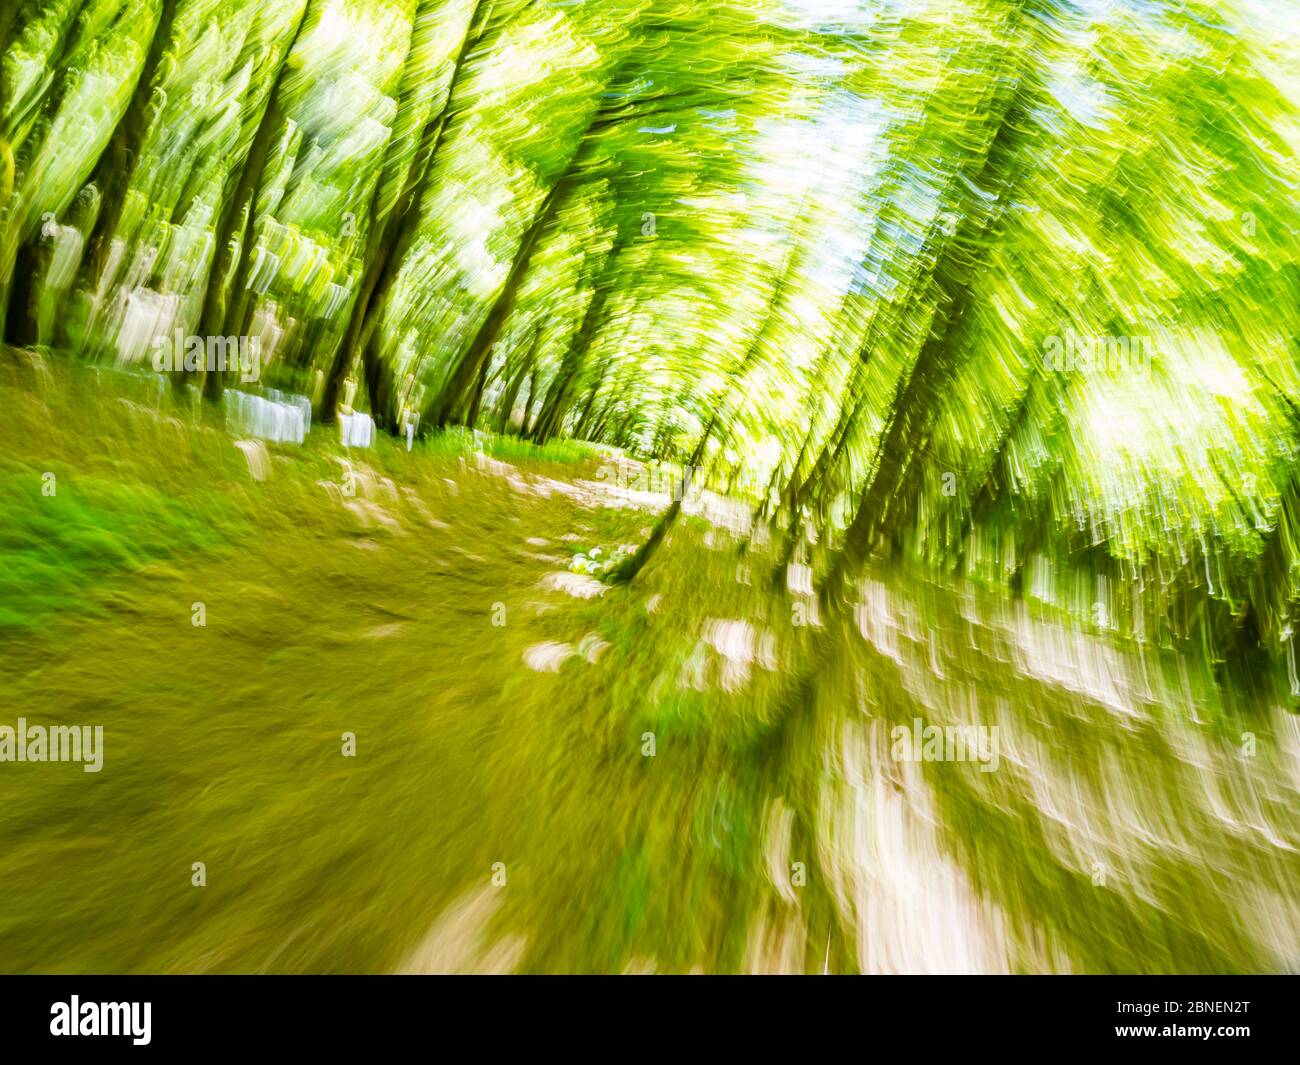 Green forest run intentionally blurry representing maximum utmost speed speedy fast movement trees and branches leaves Stock Photo